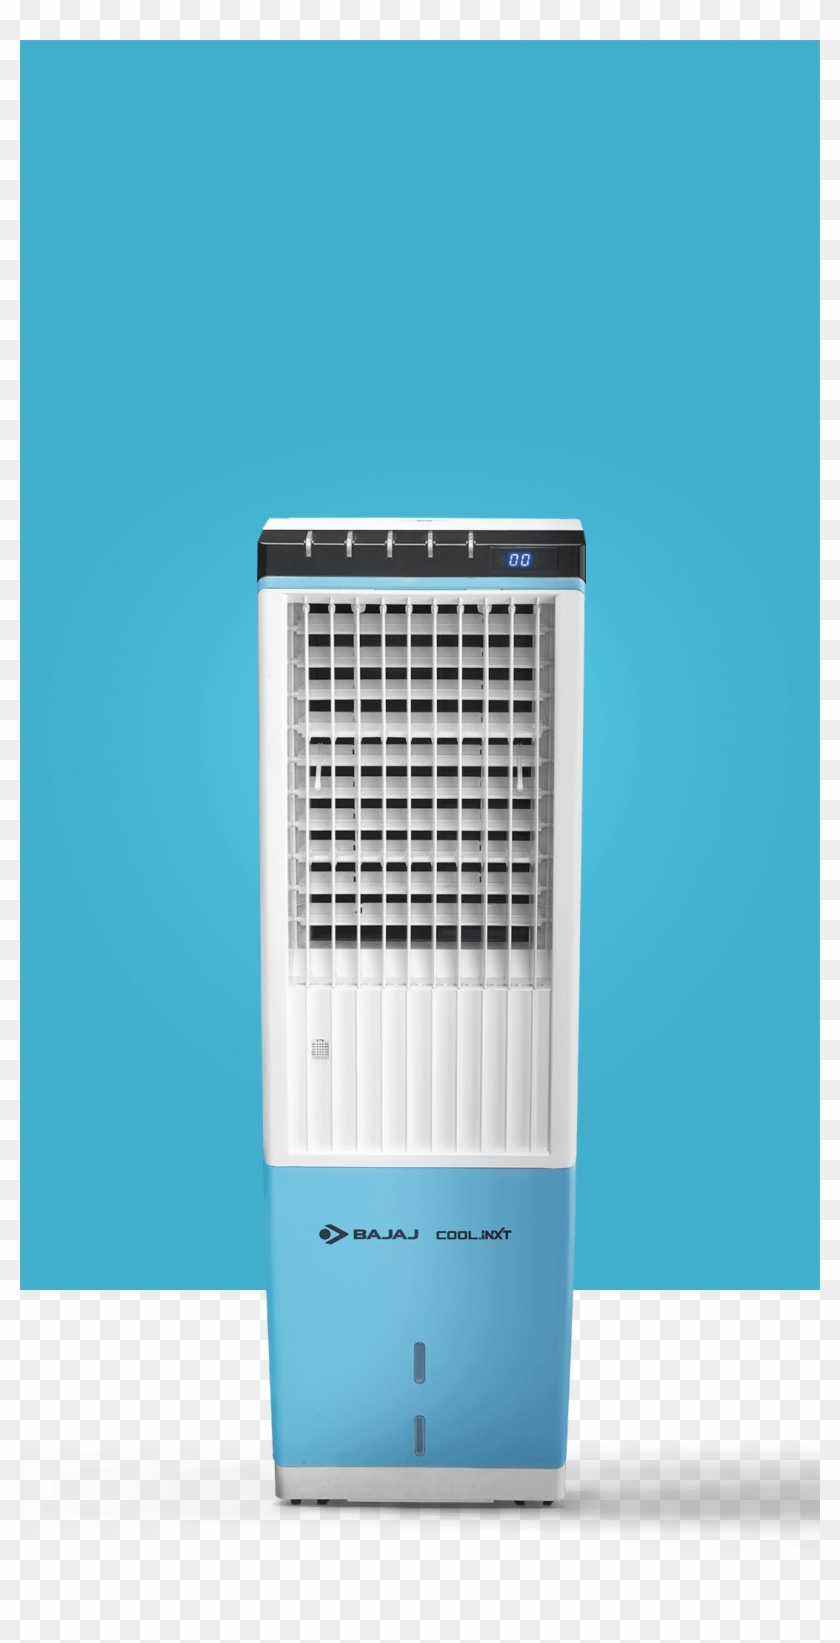 India's First Wi-fi & Internet Enabled Air Cooler - Computer Case Clipart #117115